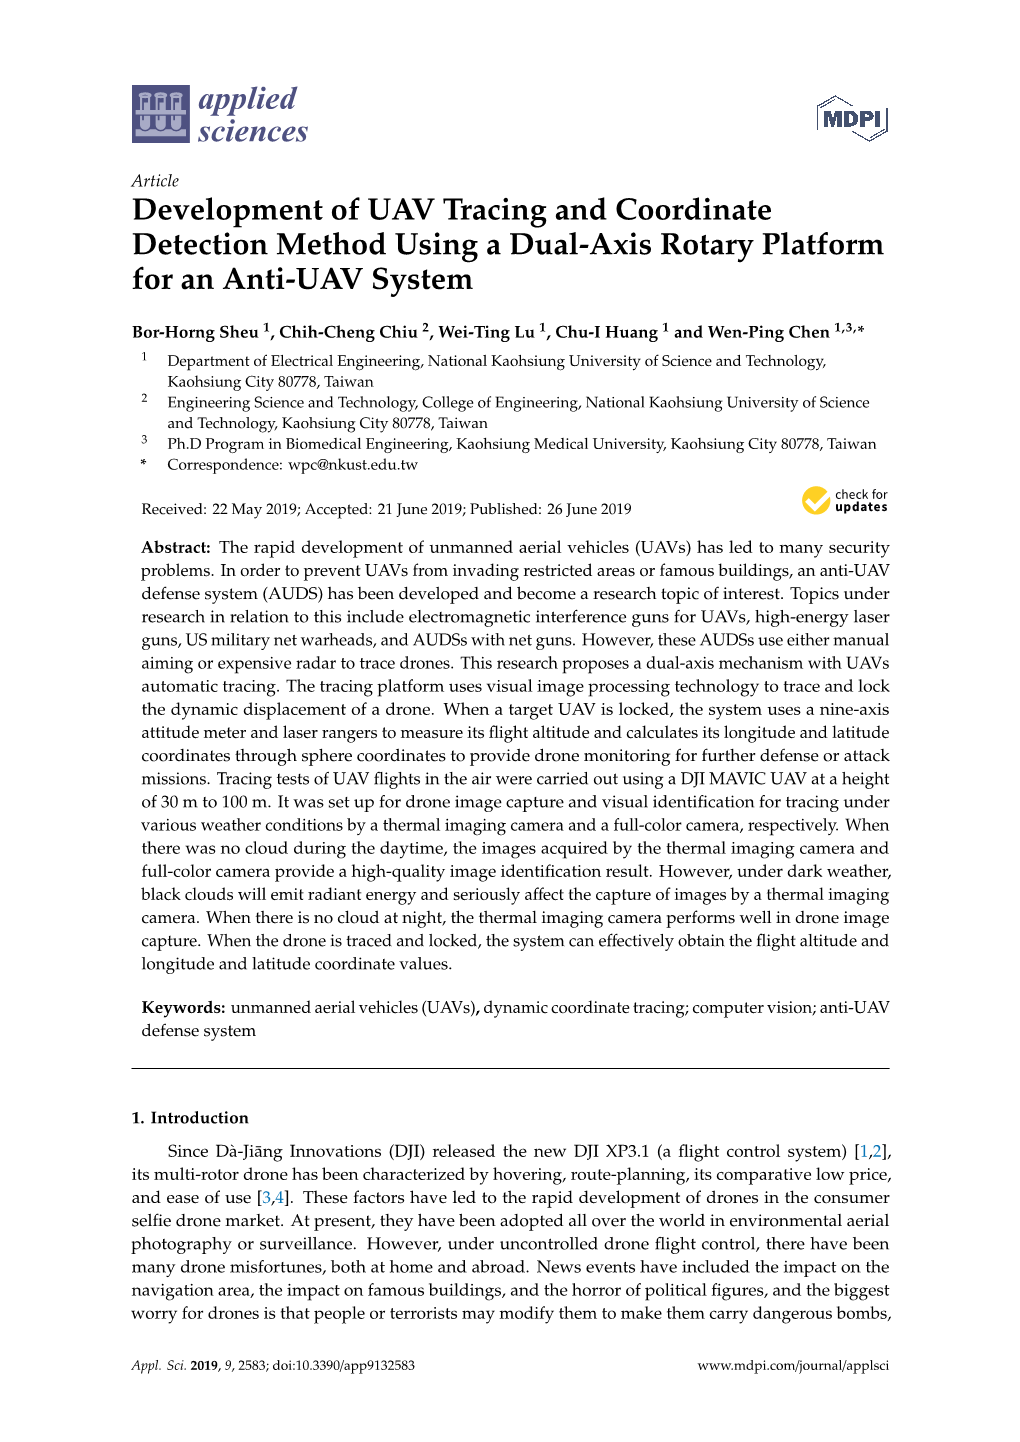 Development of UAV Tracing and Coordinate Detection Method Using a Dual-Axis Rotary Platform for an Anti-UAV System